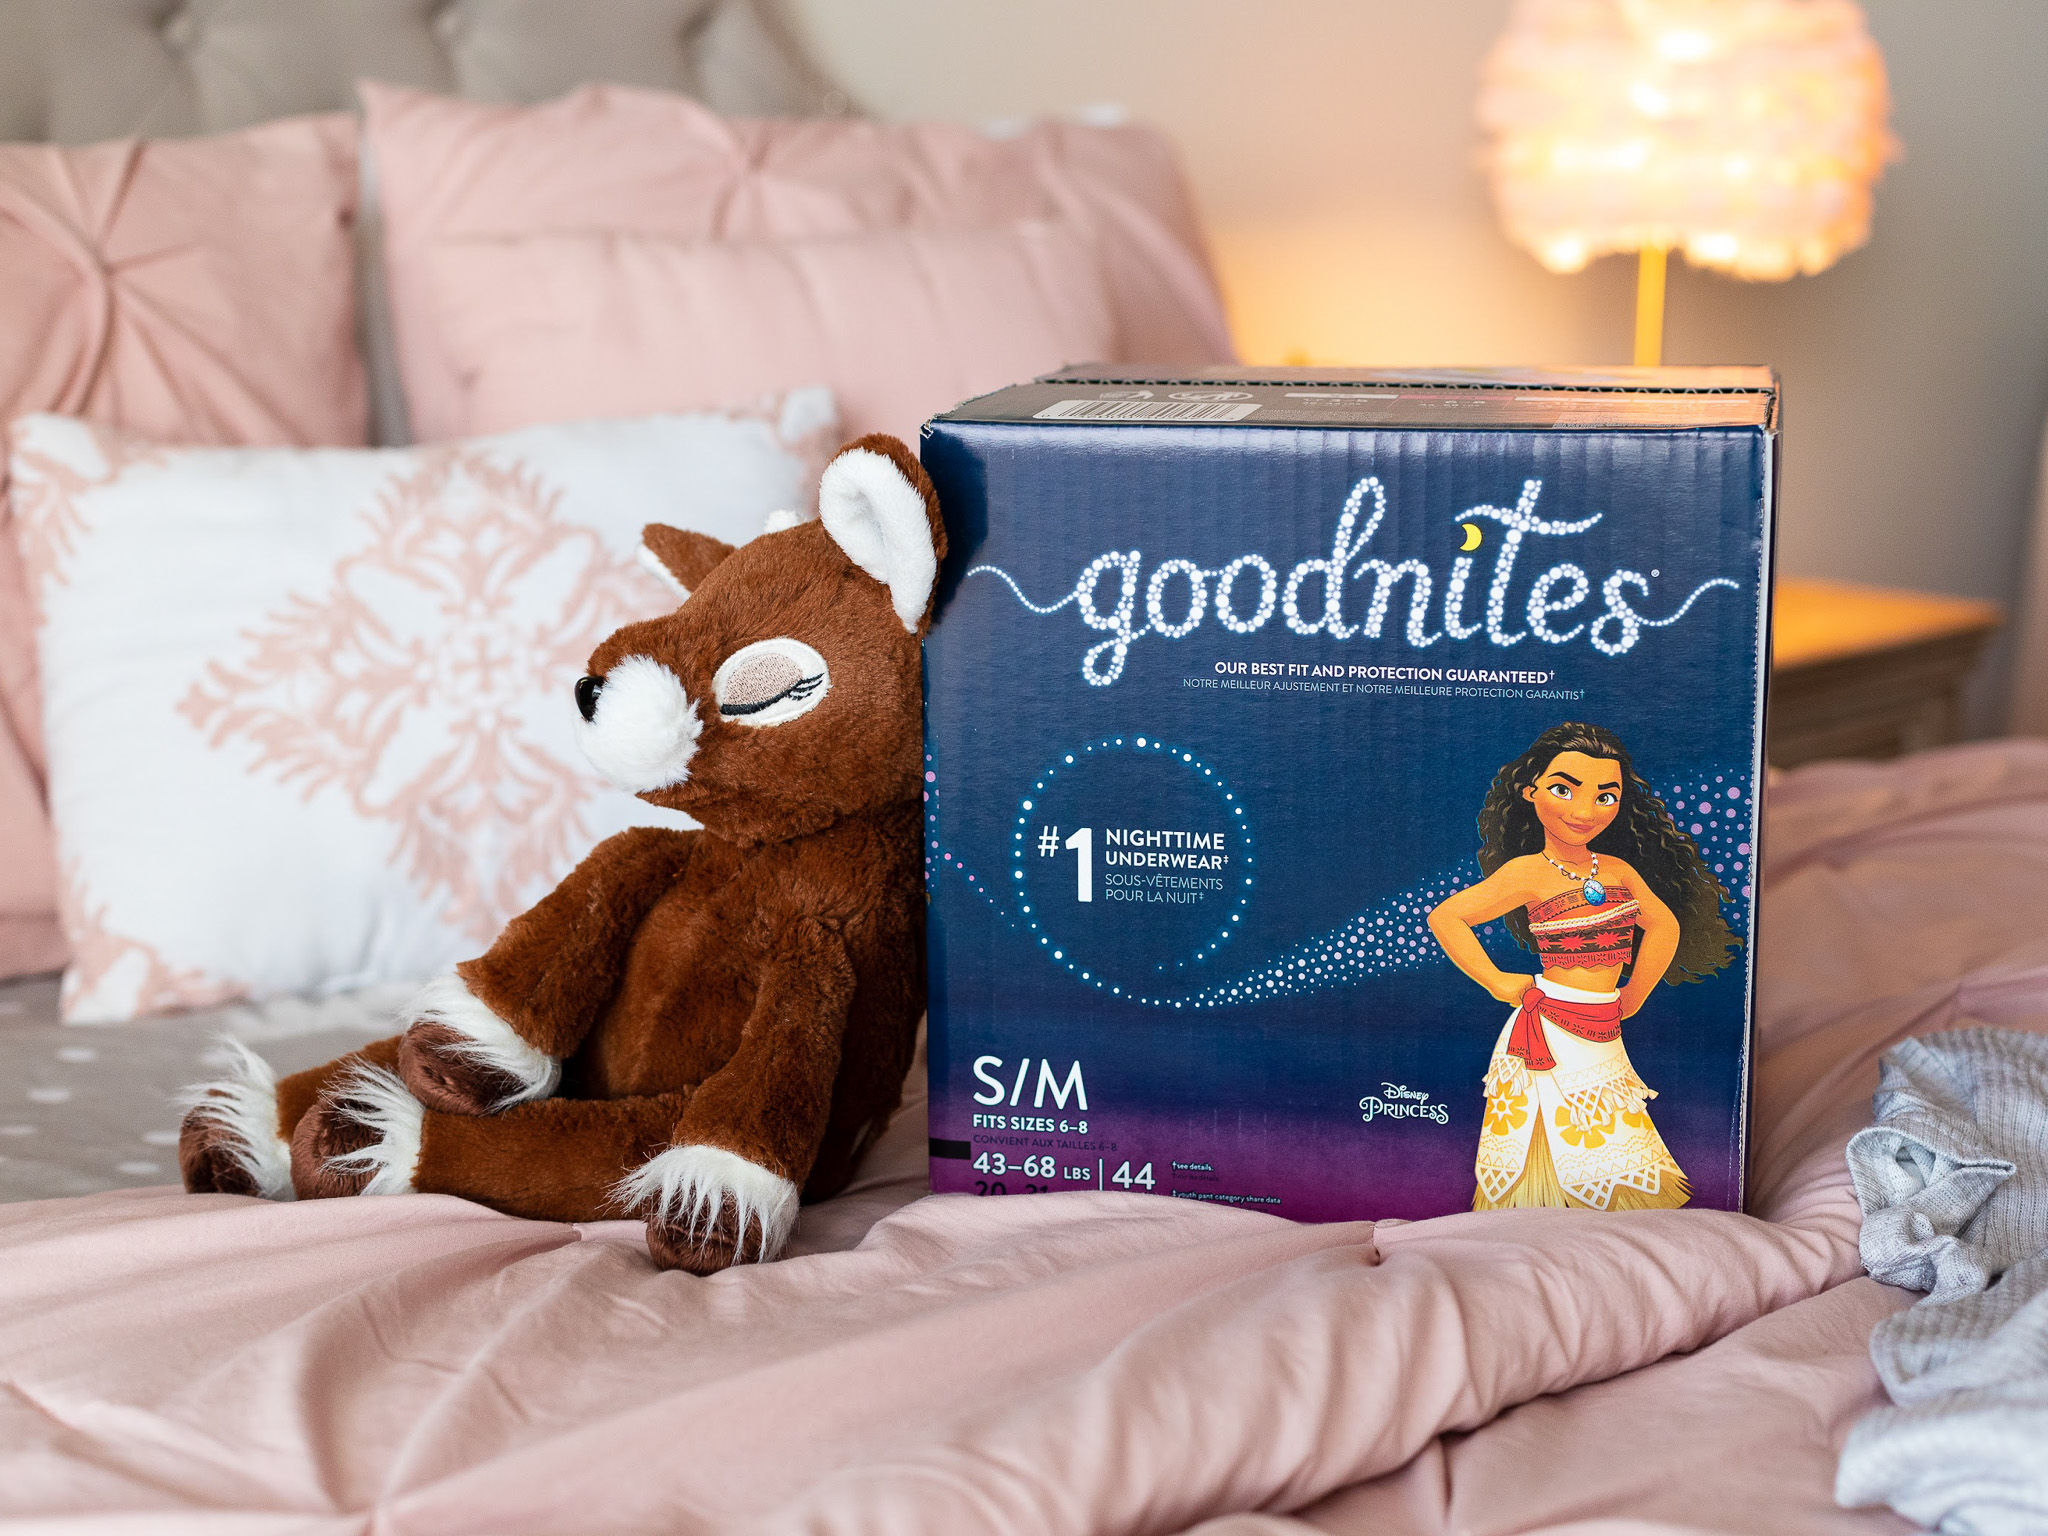 Huge Savings On Goodnites® At Publix – Save $5 With The Big Digital Coupon!  - iHeartPublix